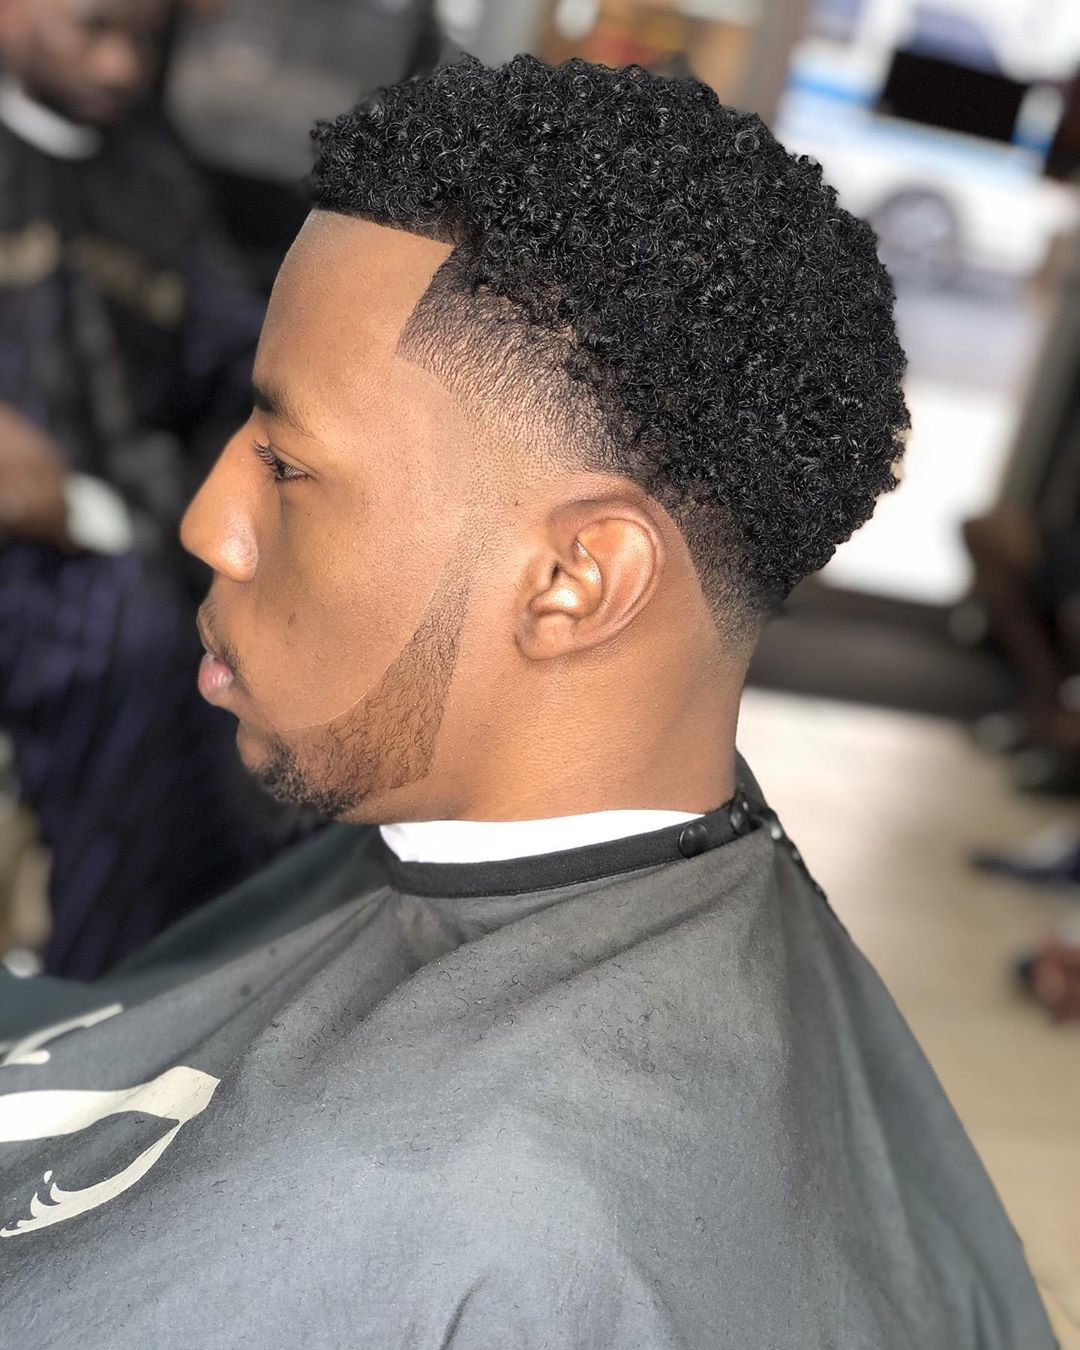 Black Boy Haircuts 2020
 THE 20 TOP SHORT HAIRCUTS FOR BLACK MEN FOR 2020